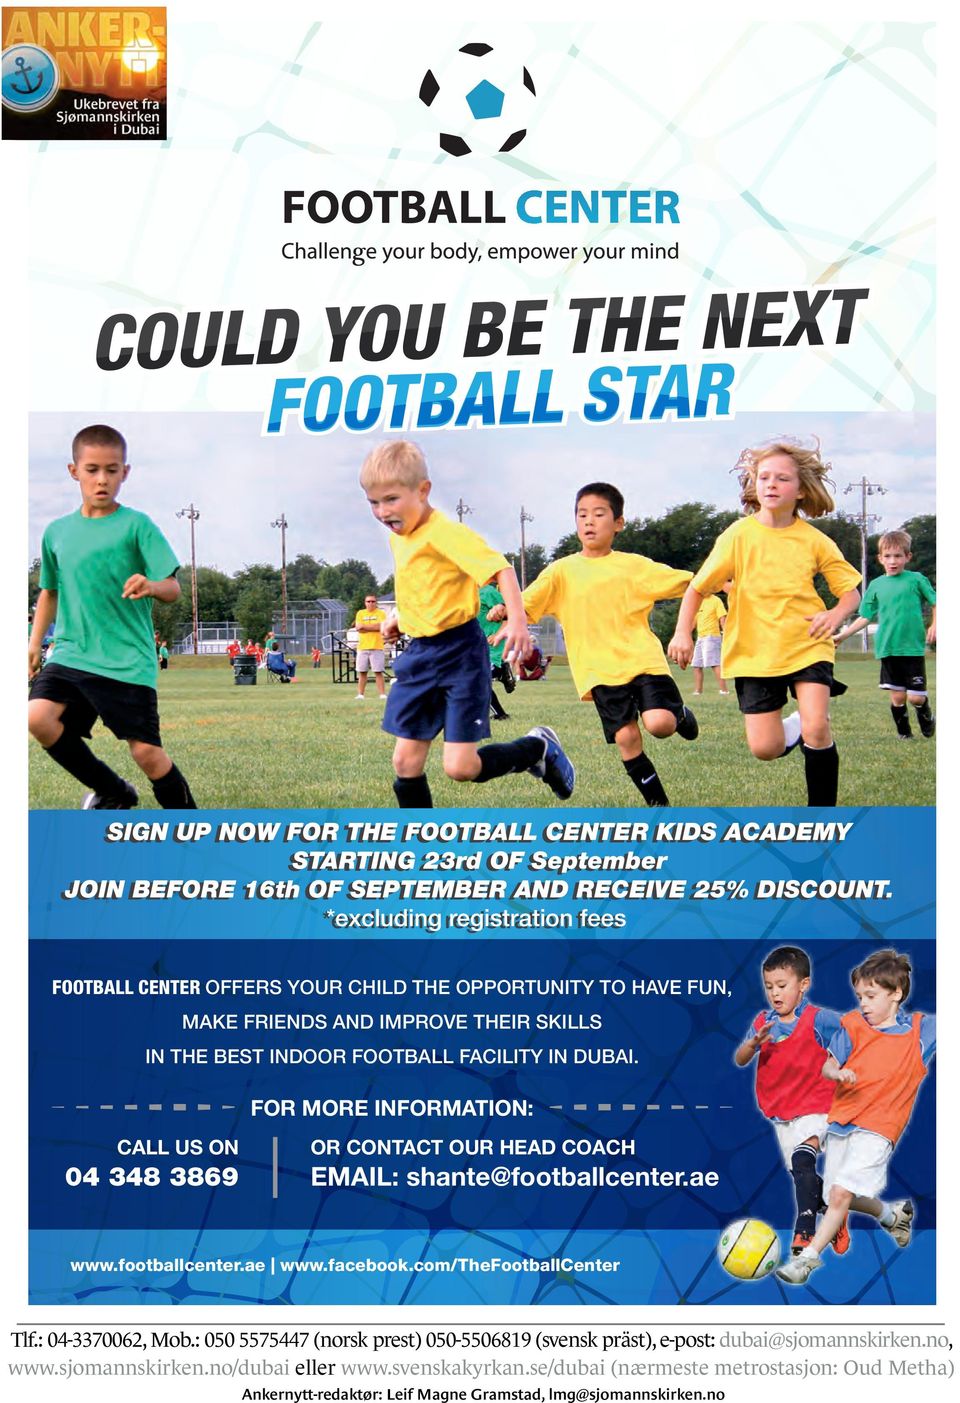 FOR MORE INFORMATION: CALL US ON 04 348 3869 OR CONTACT OUR HEAD COACH EMAIL: shante@footballcenter.ae www.footballcenter.ae www.facebook.com/thefootballcenter Tlf.: 04-3370062, Mob.